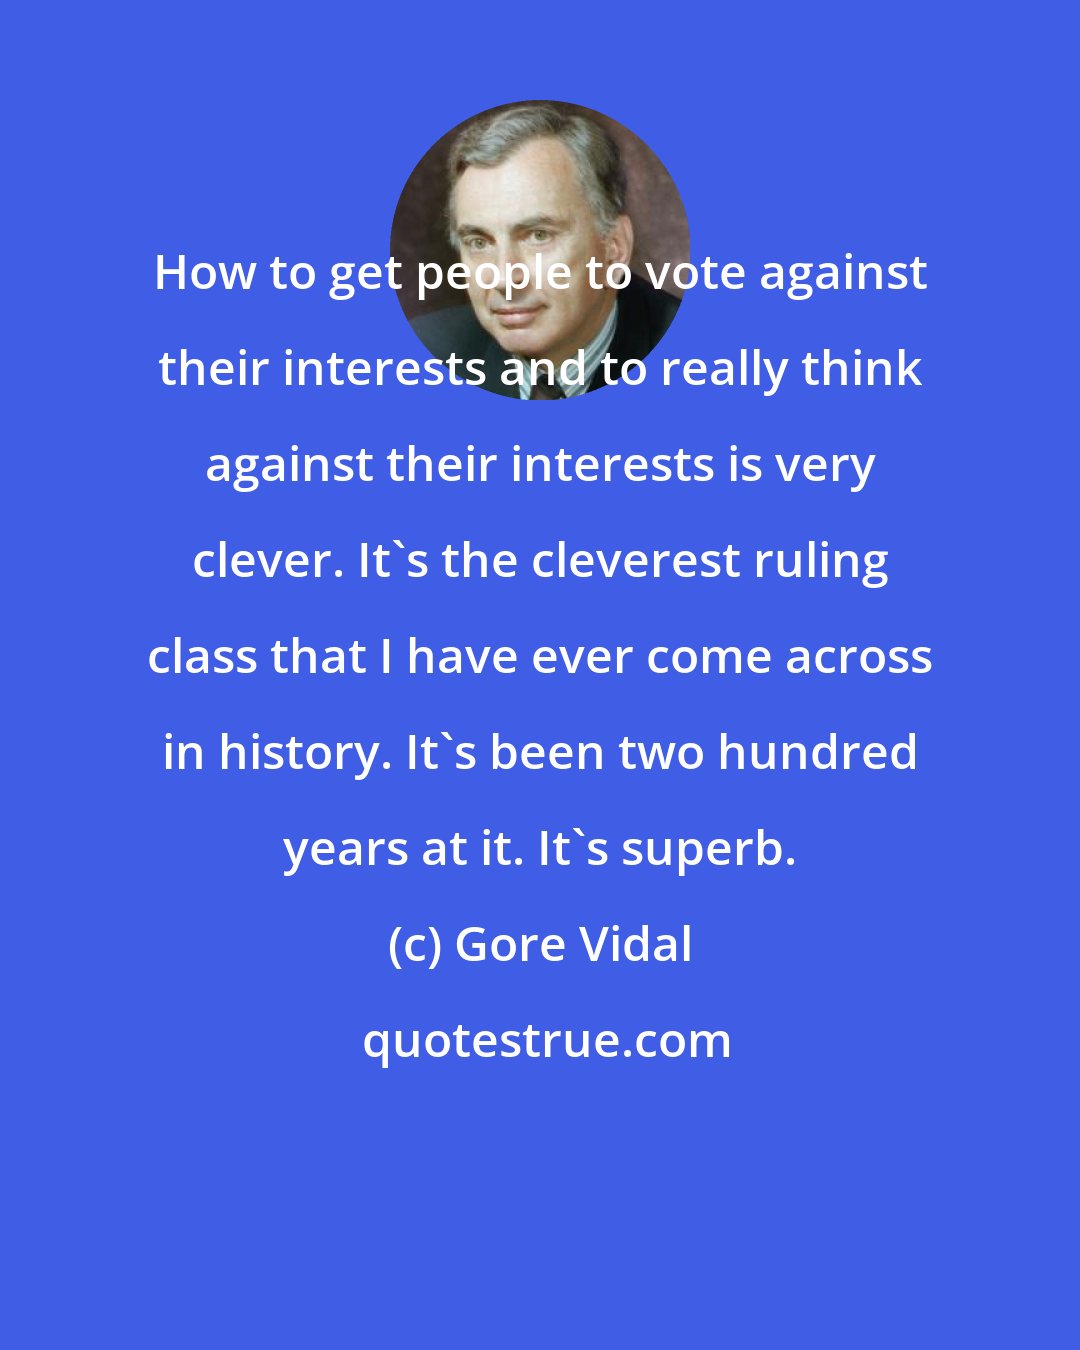 Gore Vidal: How to get people to vote against their interests and to really think against their interests is very clever. It's the cleverest ruling class that I have ever come across in history. It's been two hundred years at it. It's superb.